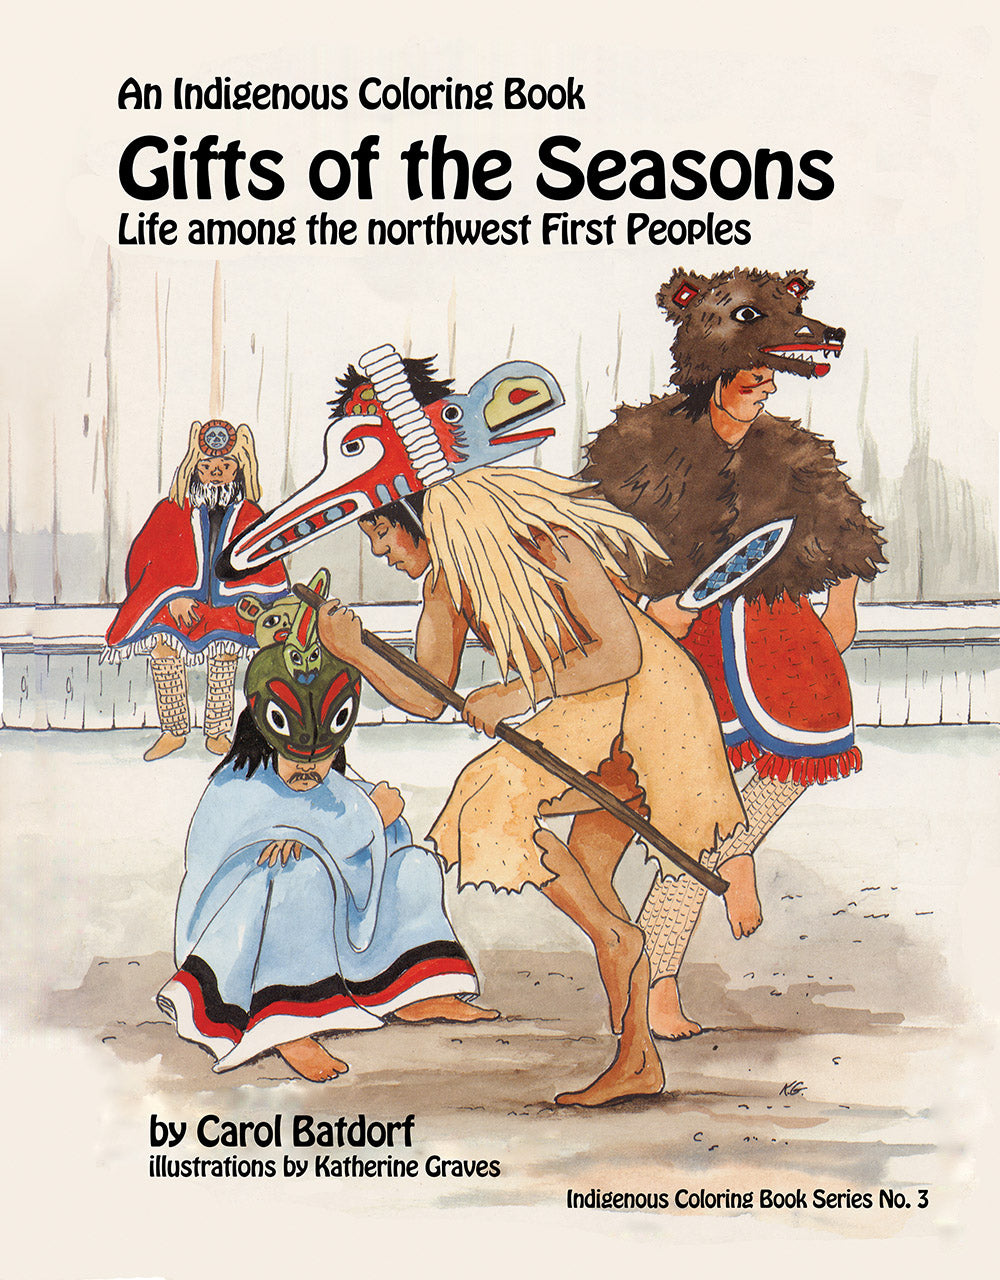 Gifts of the Season- An Indigenous Coloring Book: Life among the northwest First Peoples